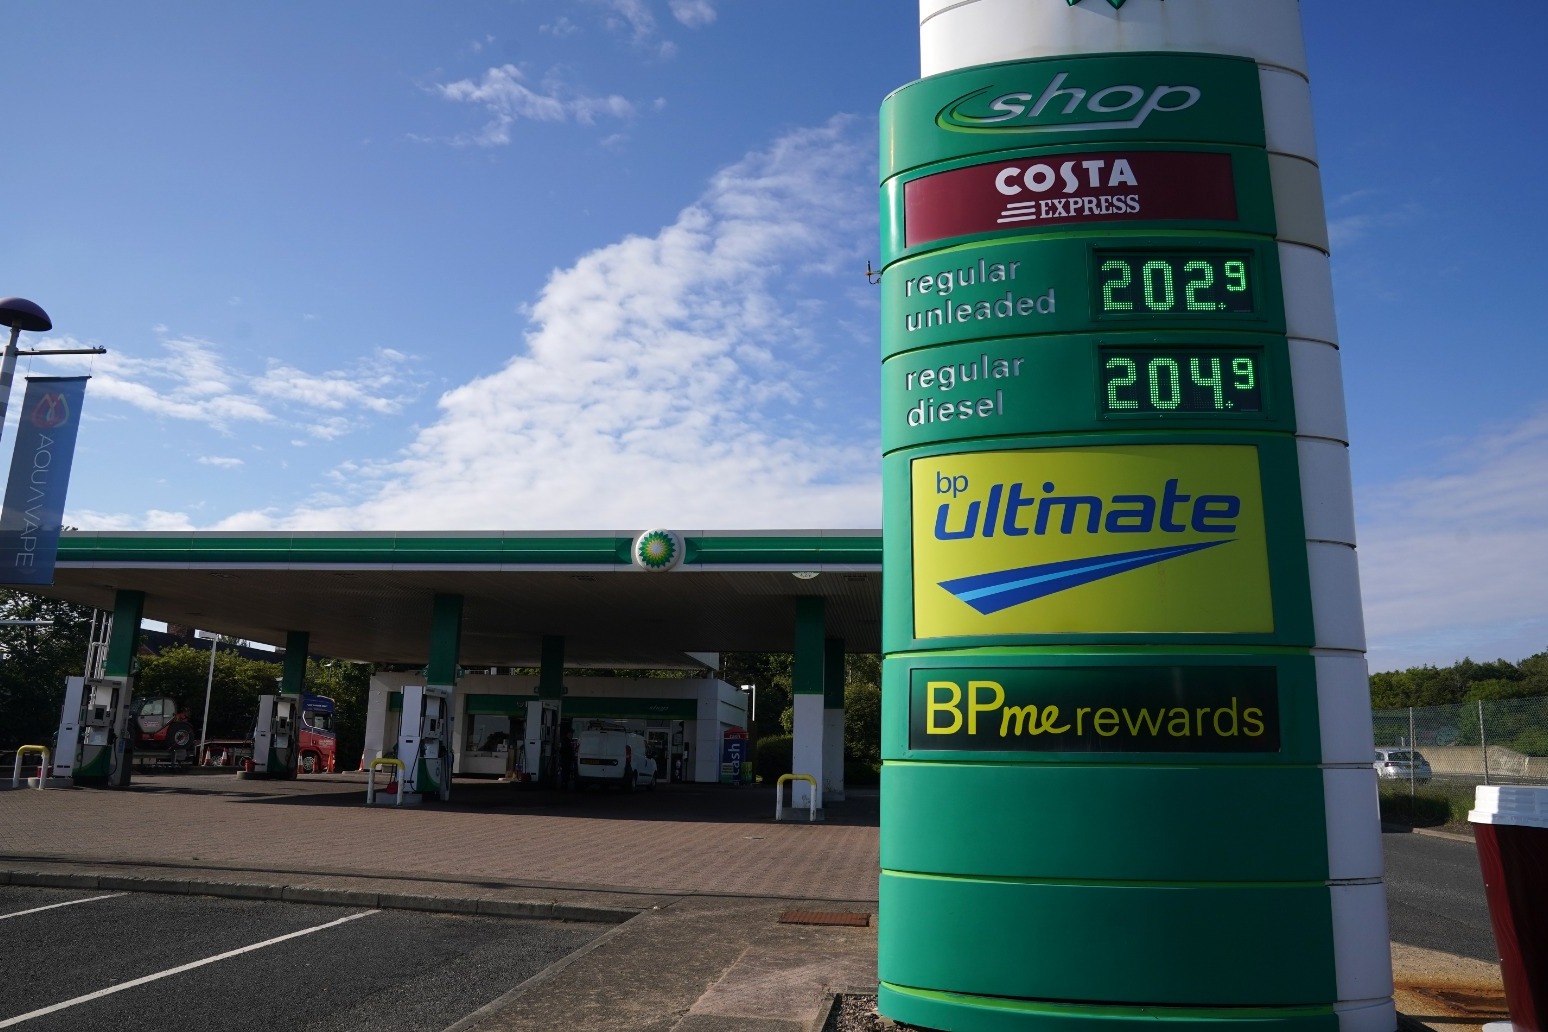 Average cost of filling family car with petrol set to hit £100 